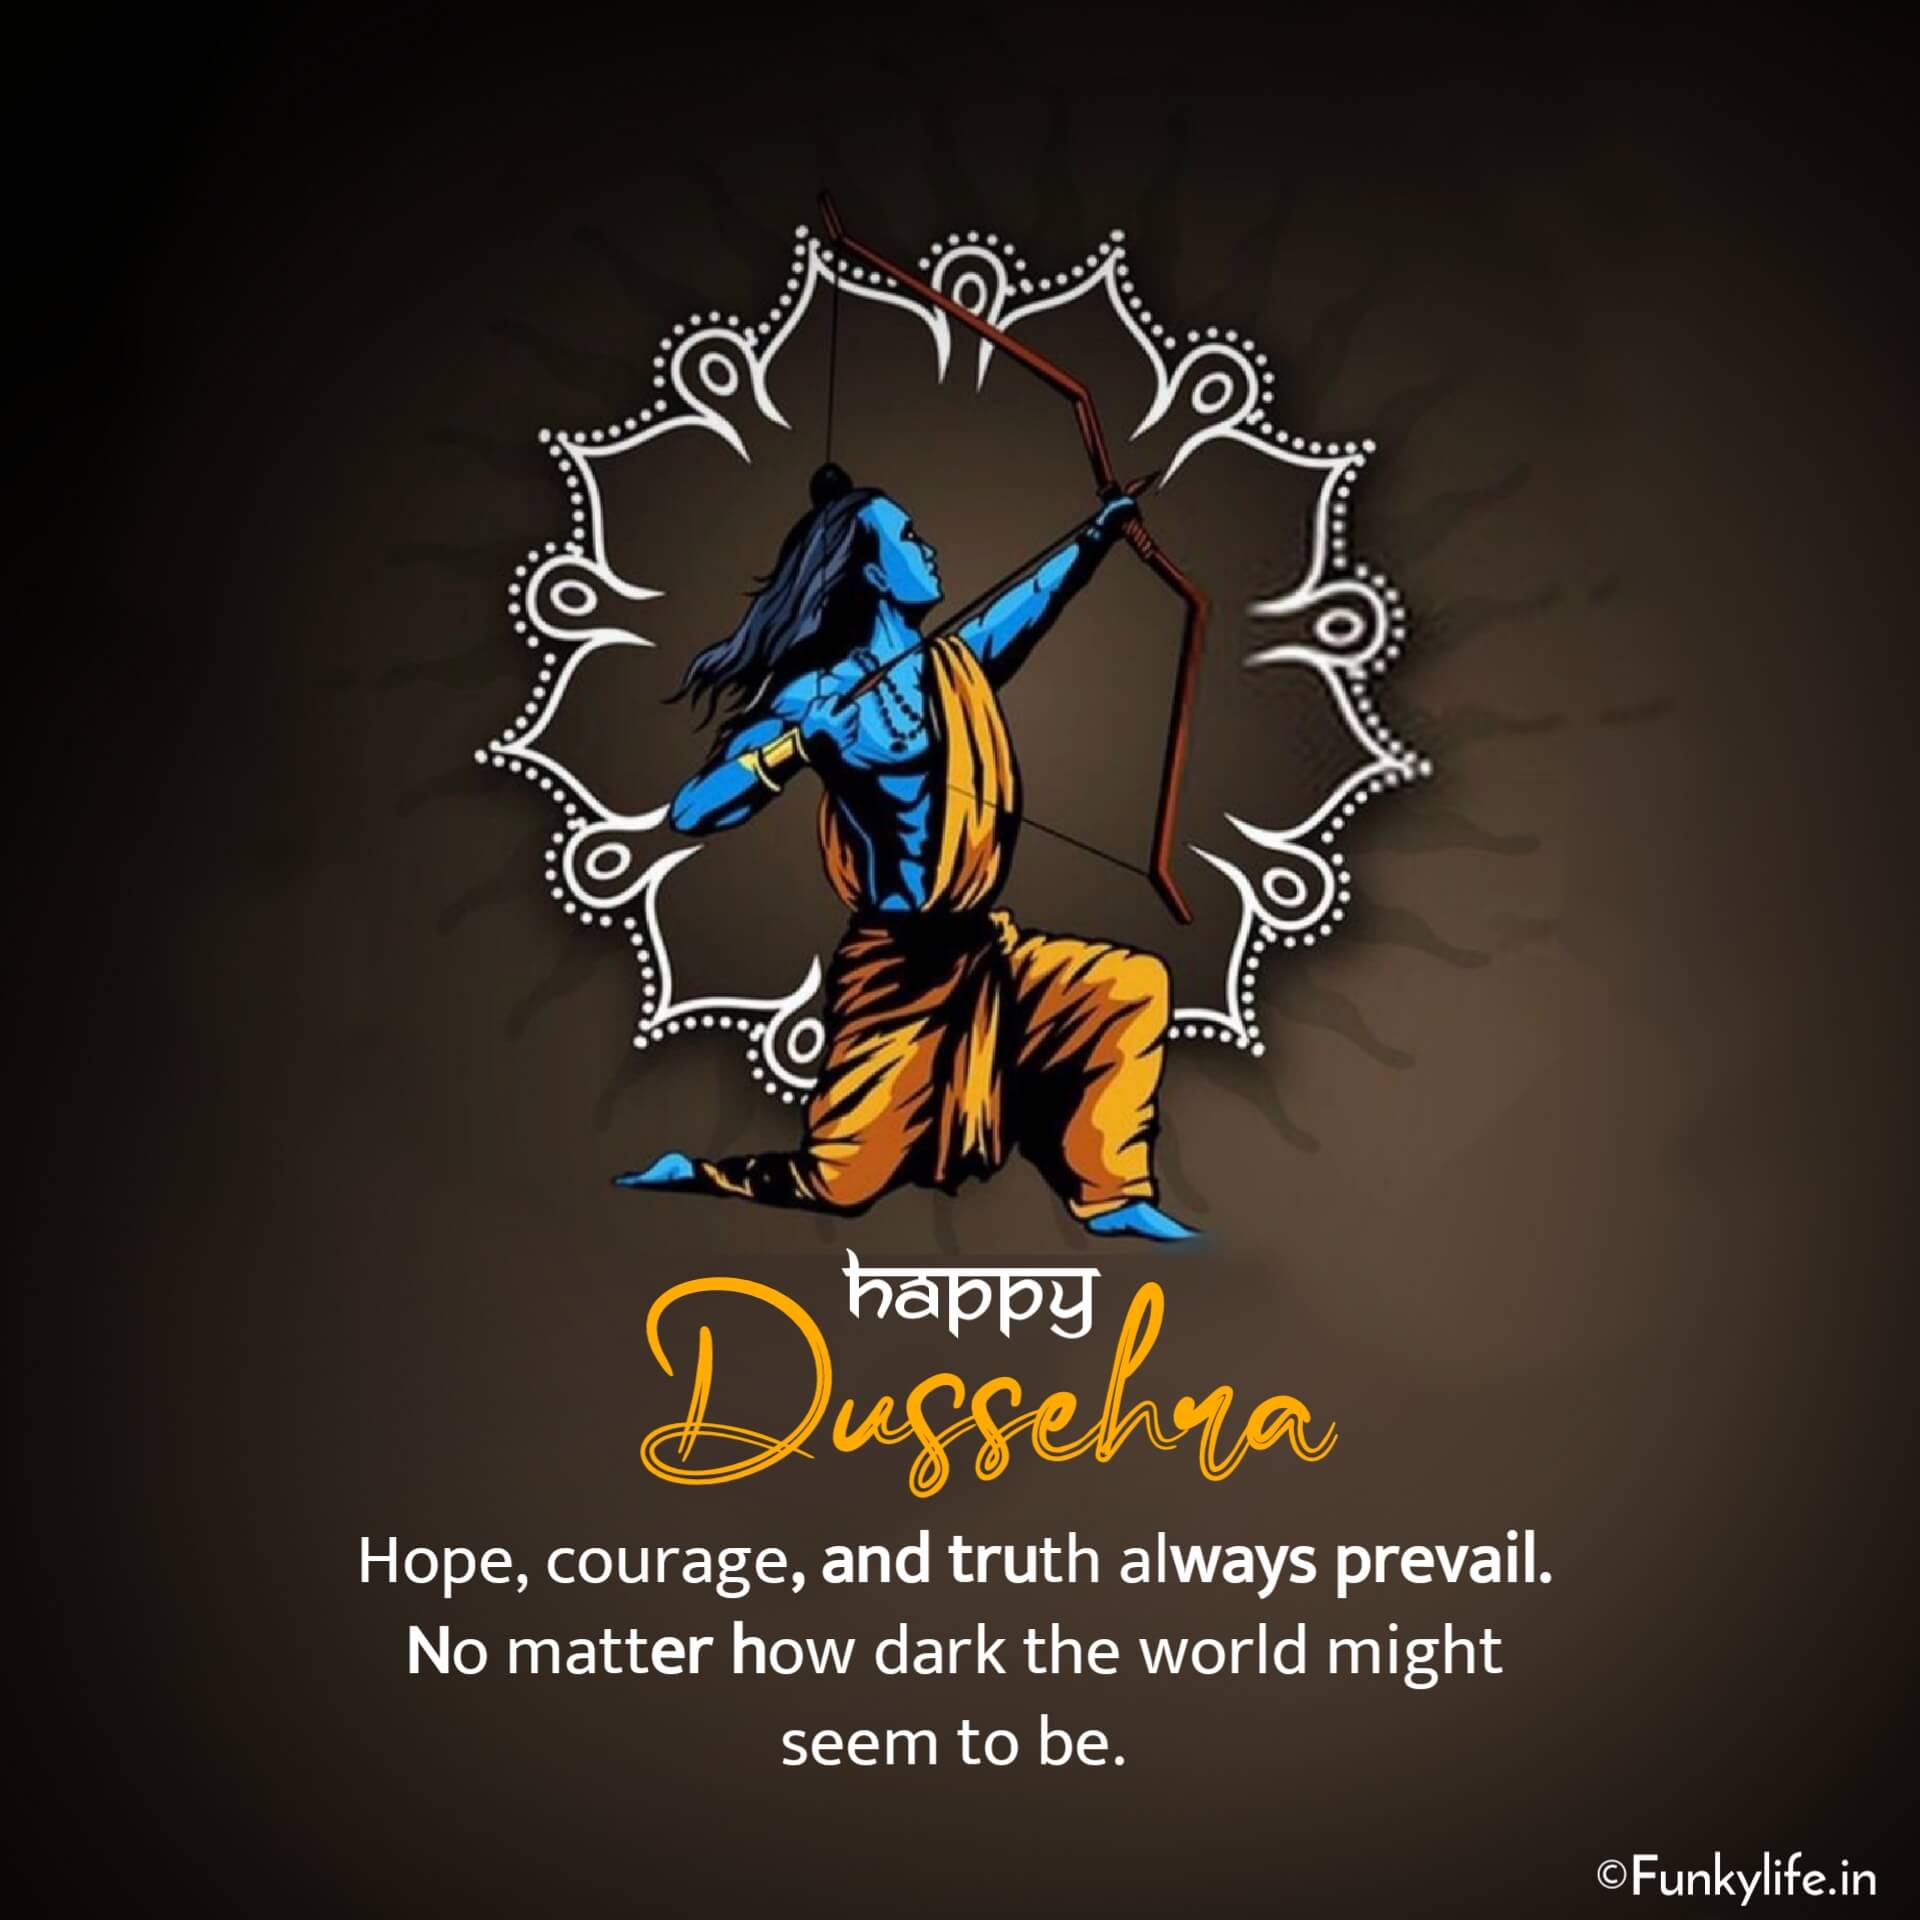 Dussehra Images with Quotes